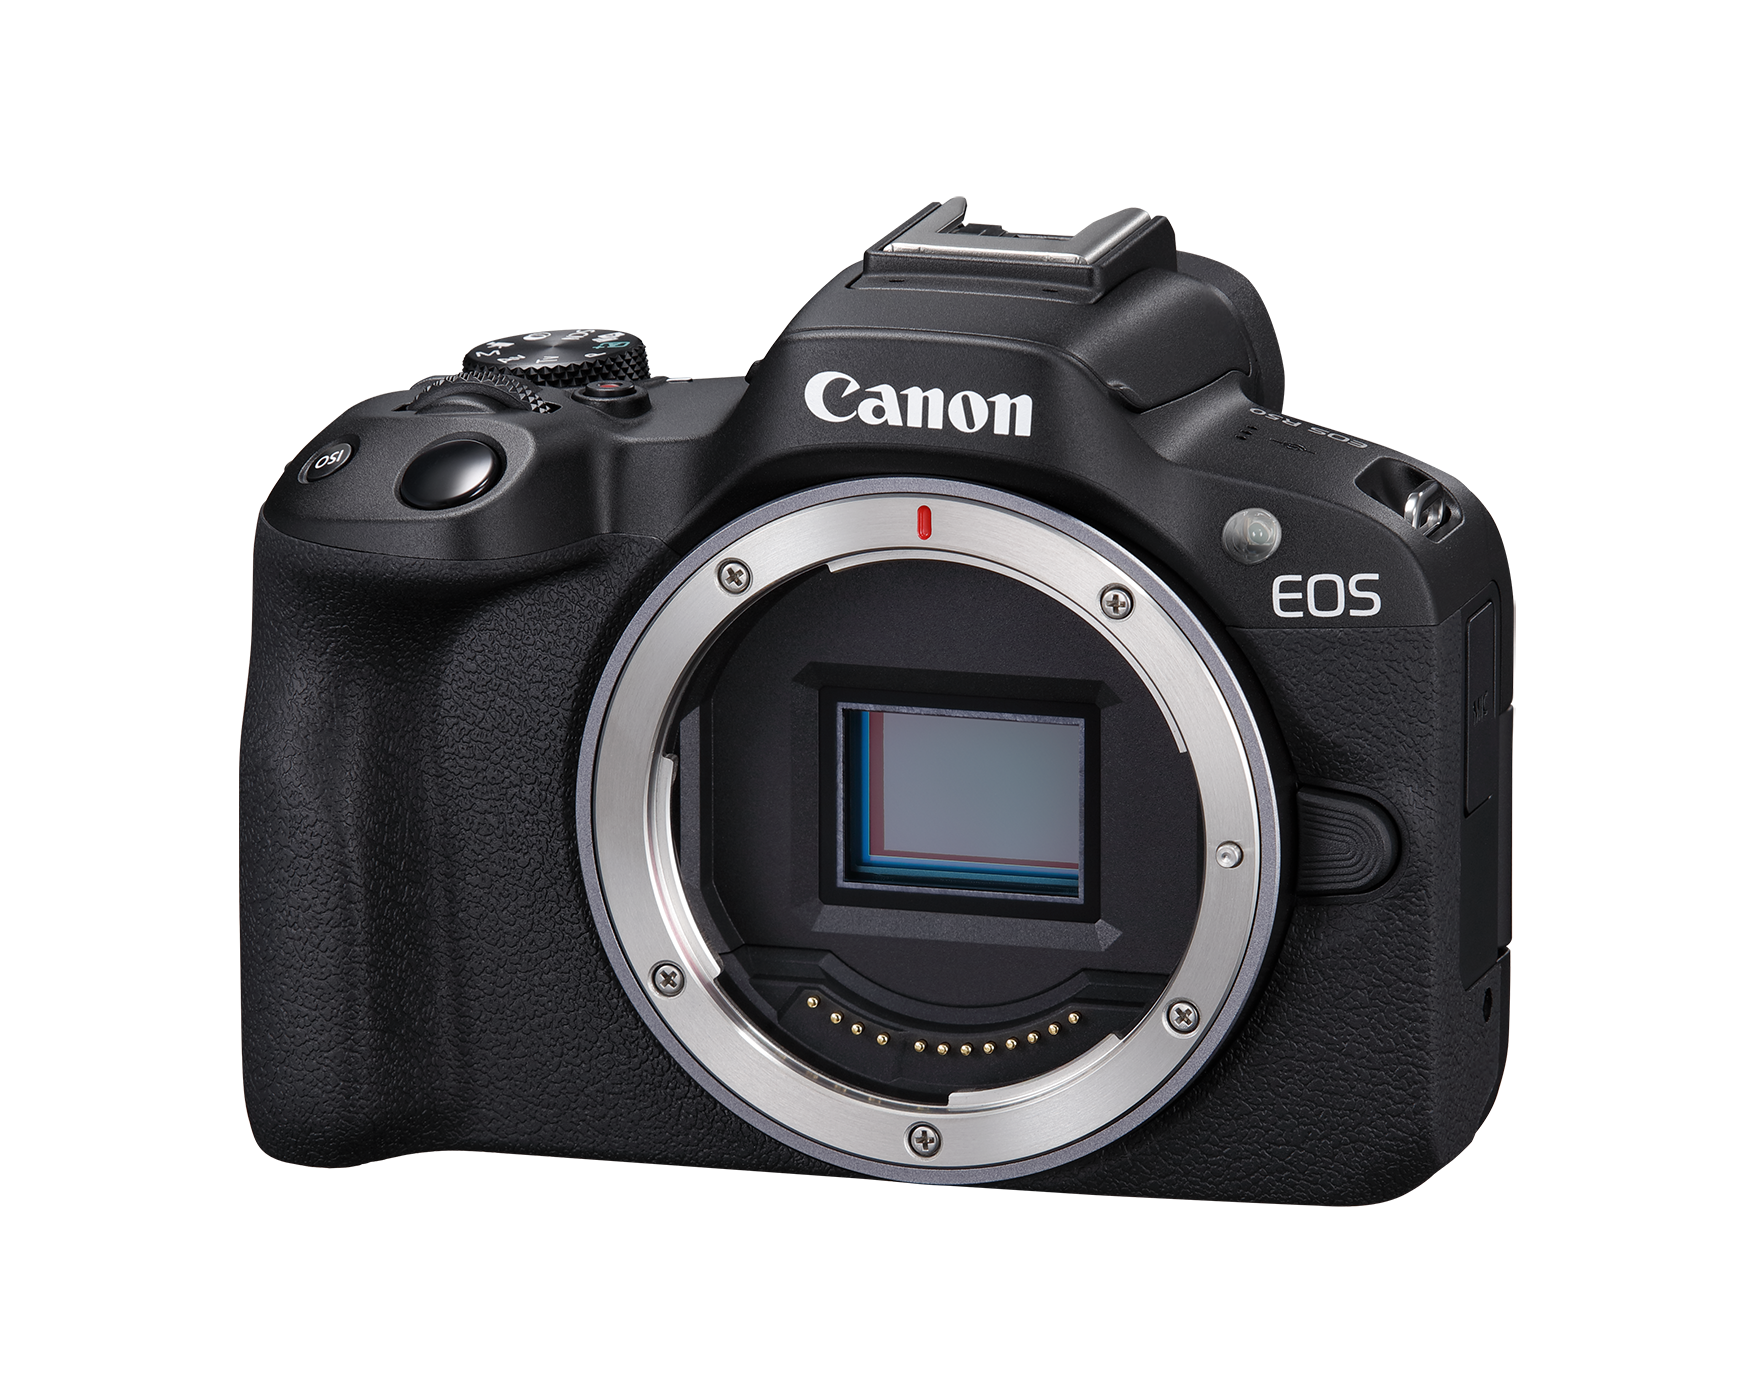 Canon adds a compact lightweight to EOS R mirrorless camera line